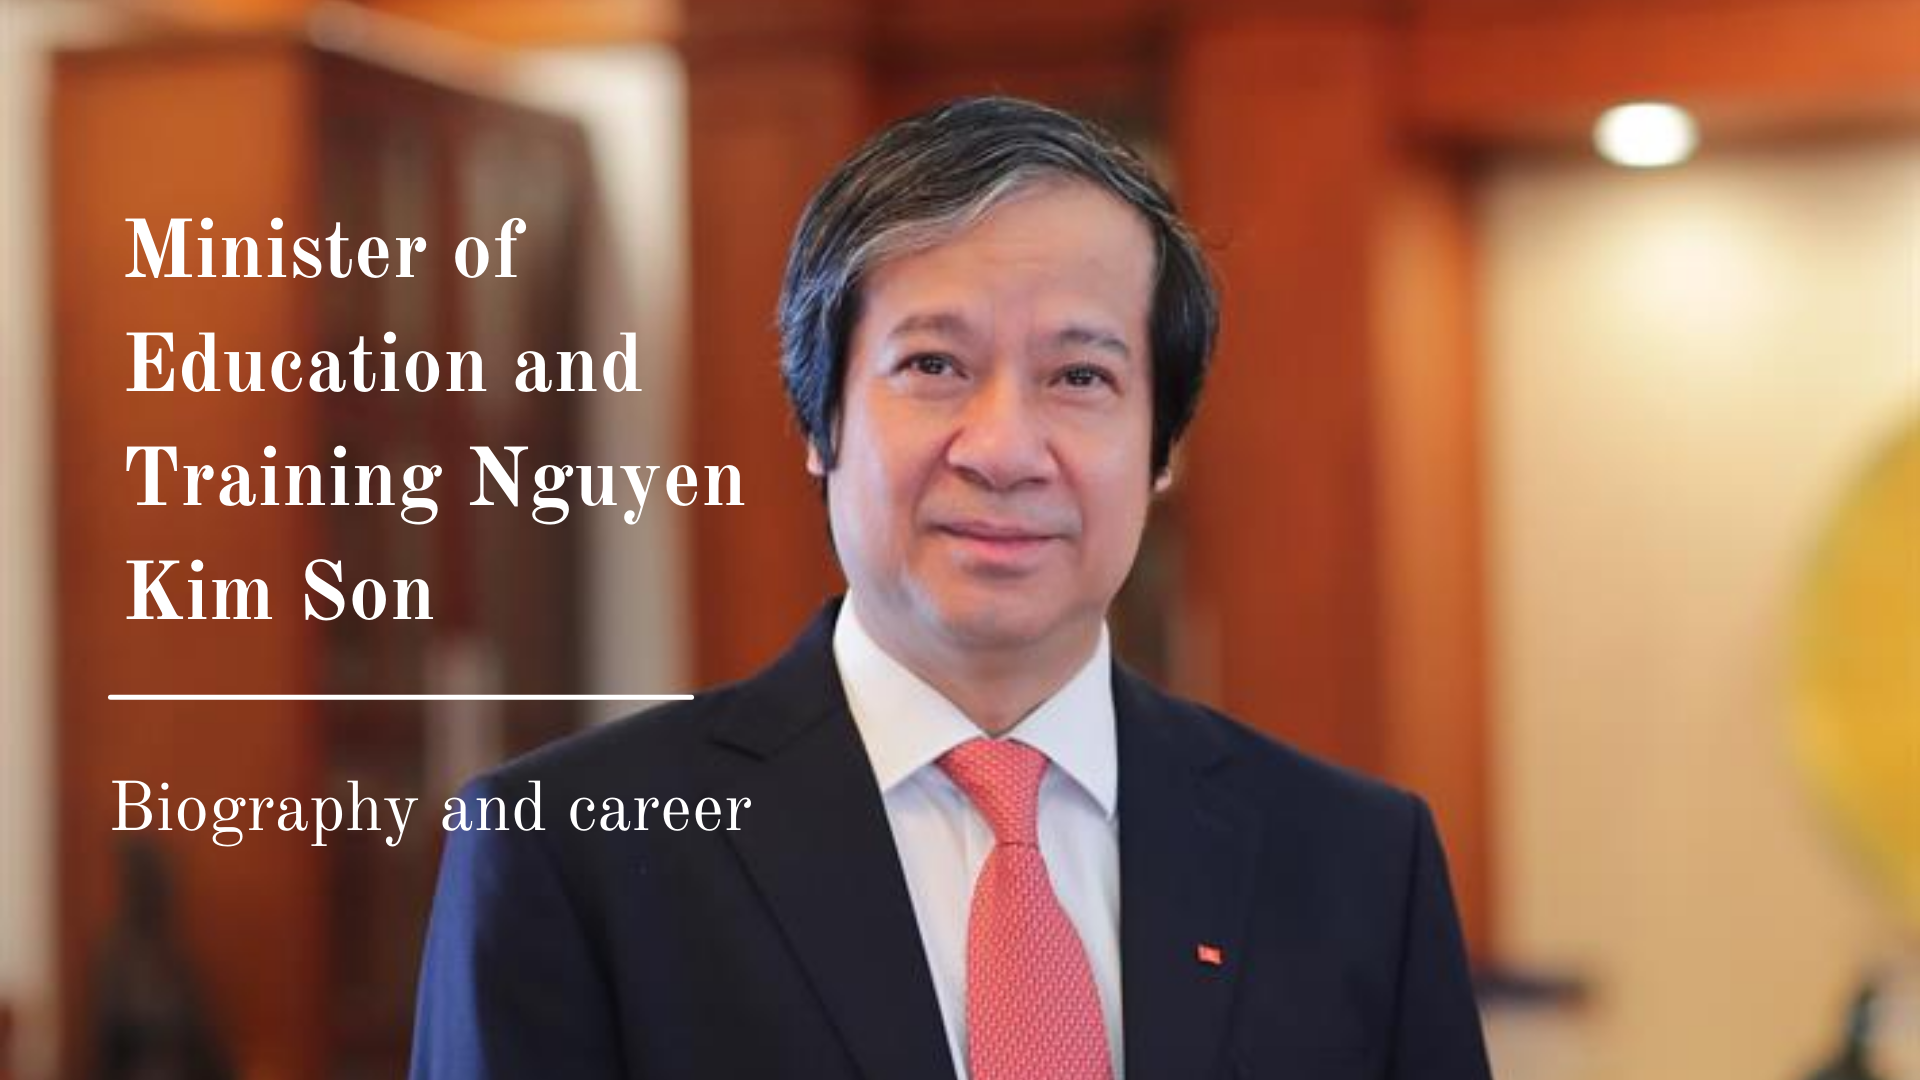 Biography of Minister of Education and Training Nguyen Kim Son: Positions and Working History